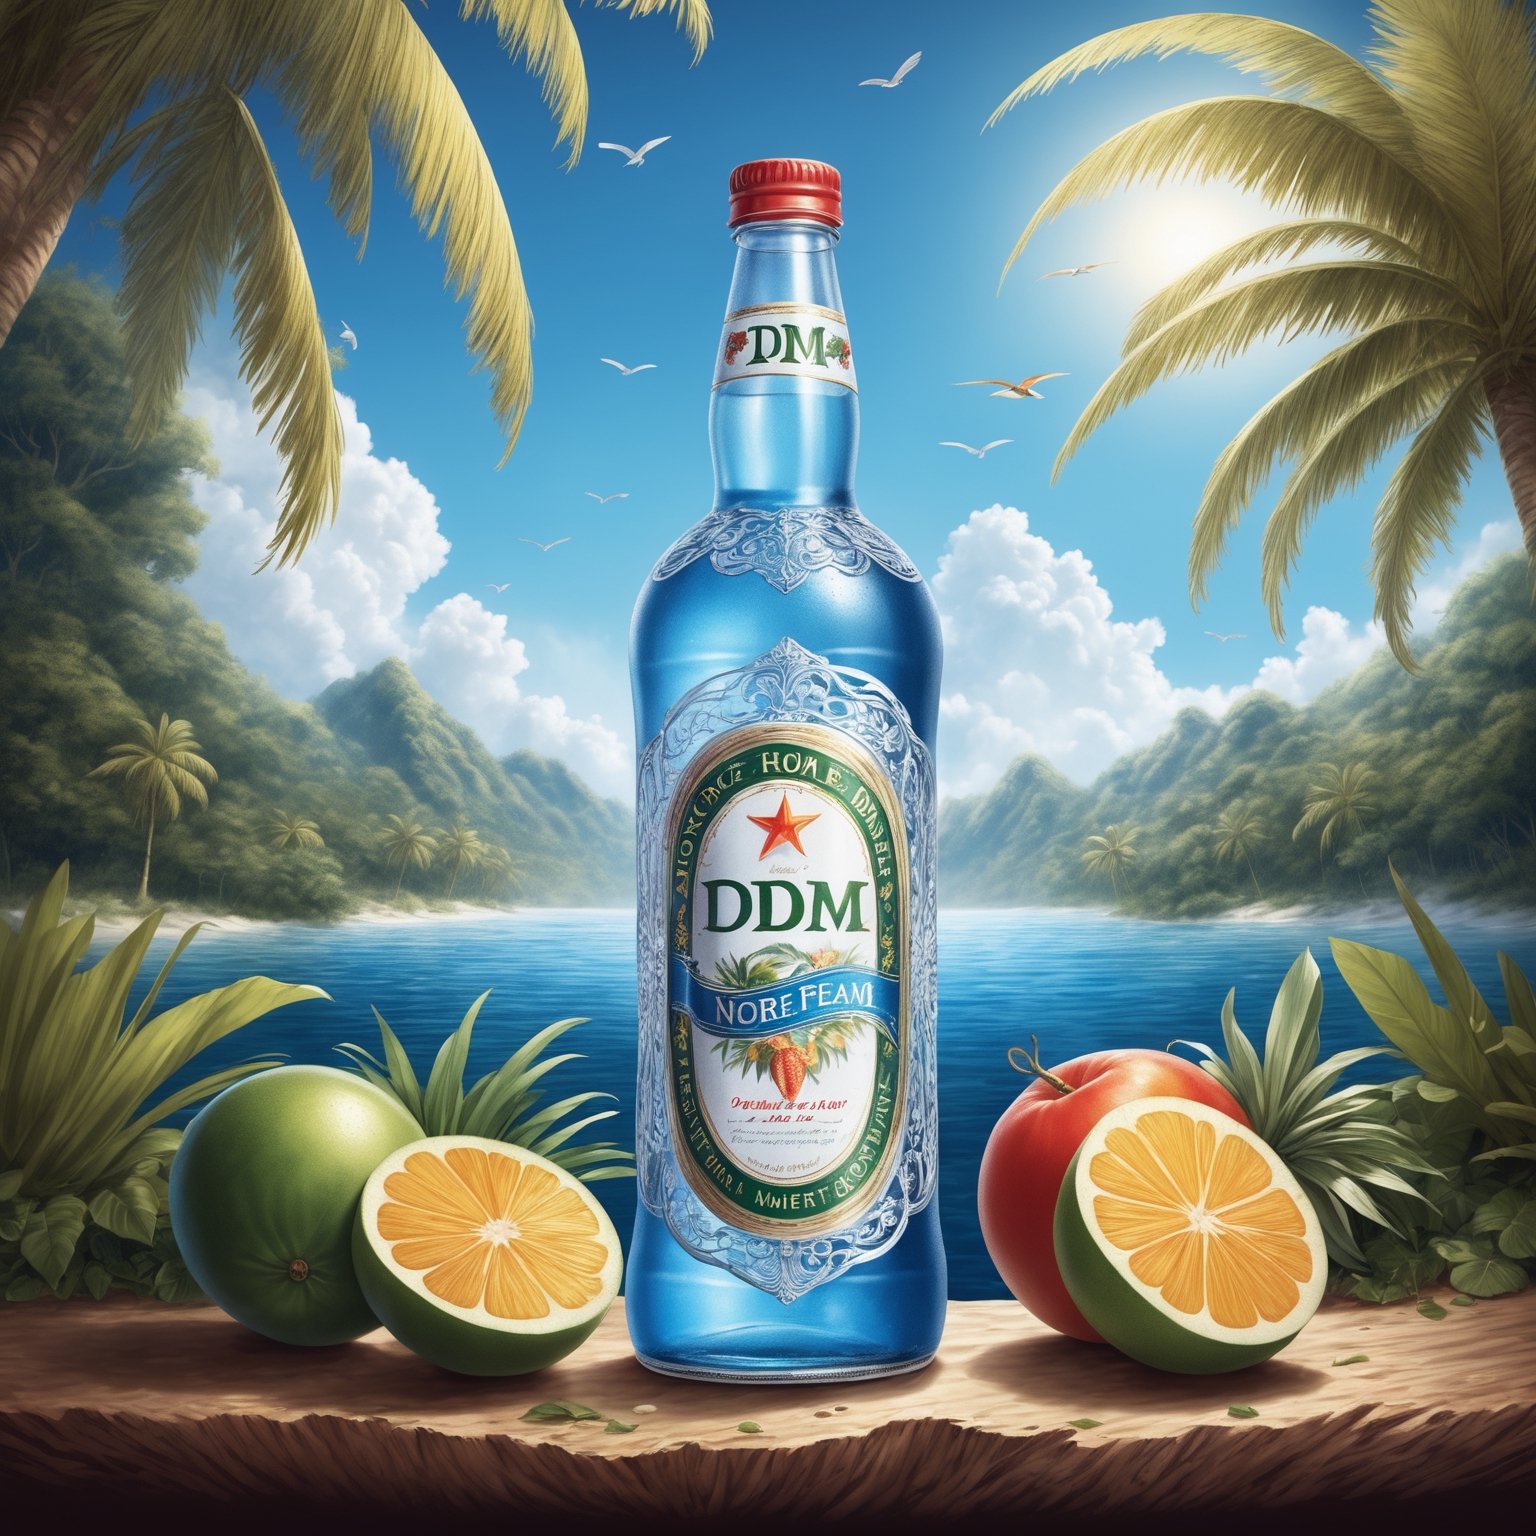 Hyper realism, no humans,beverage products, transparent bottles, one glass bottle, The cold steam that floats in the air creates a cool feeling, position in the middle ,english text and the product text is "TDNM" ,tropical background,text focus